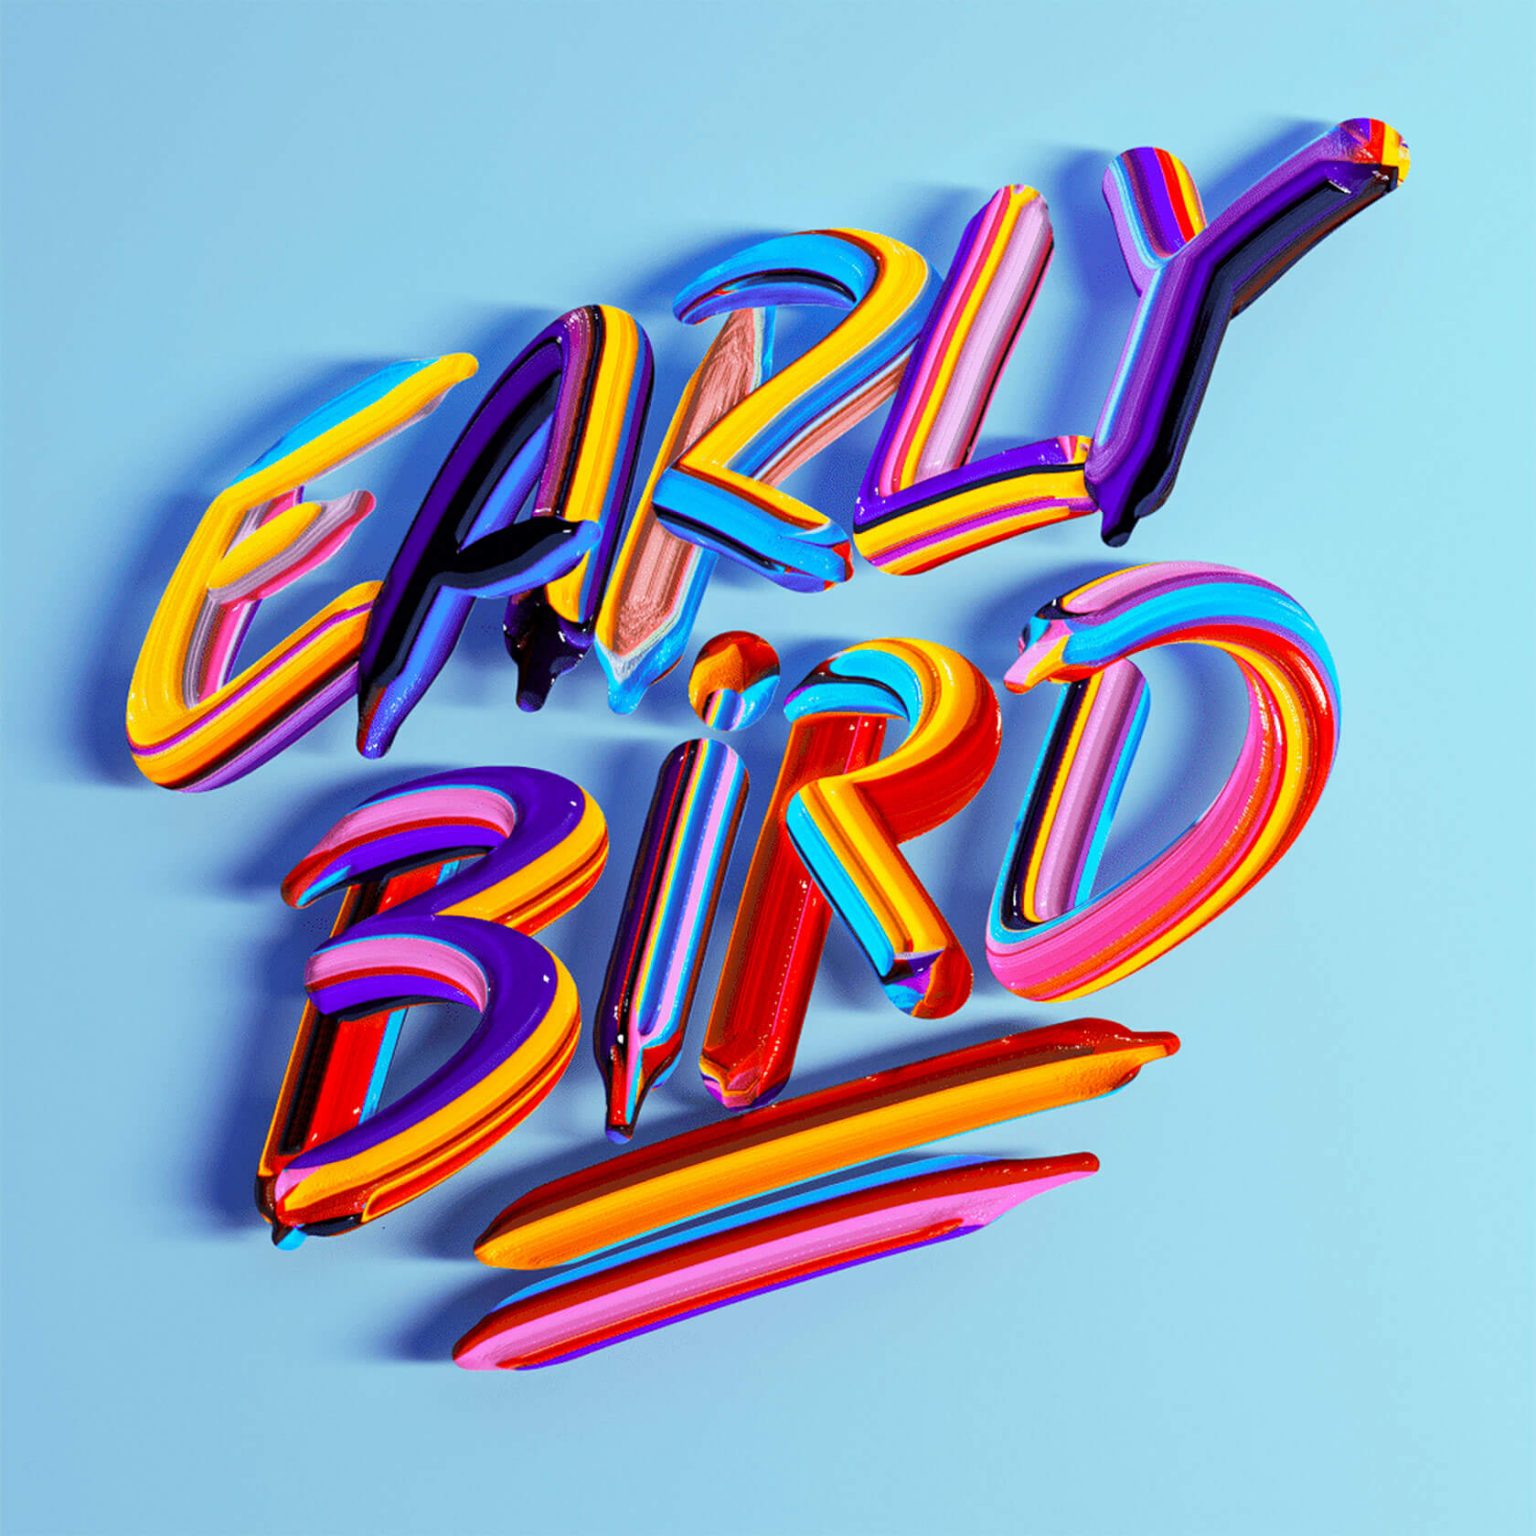 Amazing 3D Typographic Artworks by Jenue | Daily design inspiration for ...